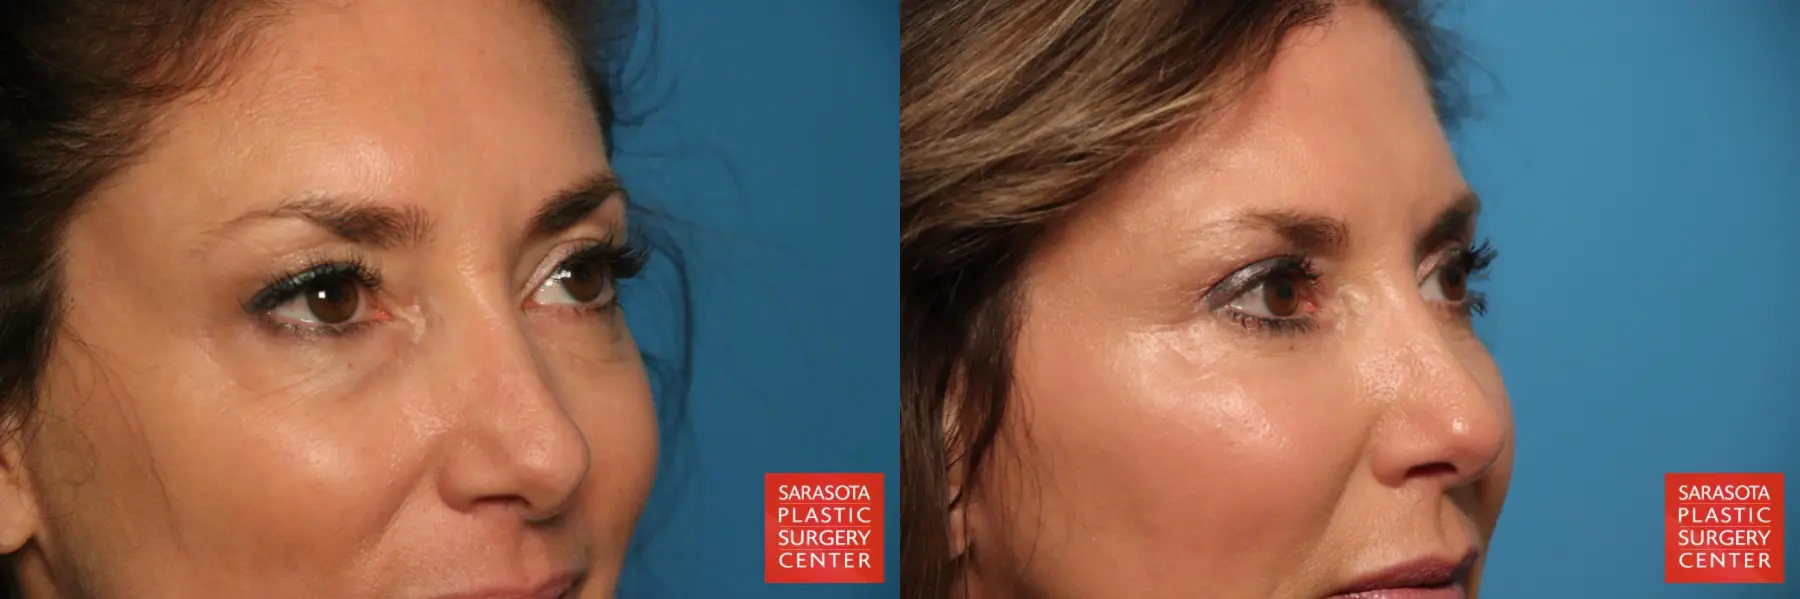 Eyelid Surgery: Patient 6 - Before and After 6